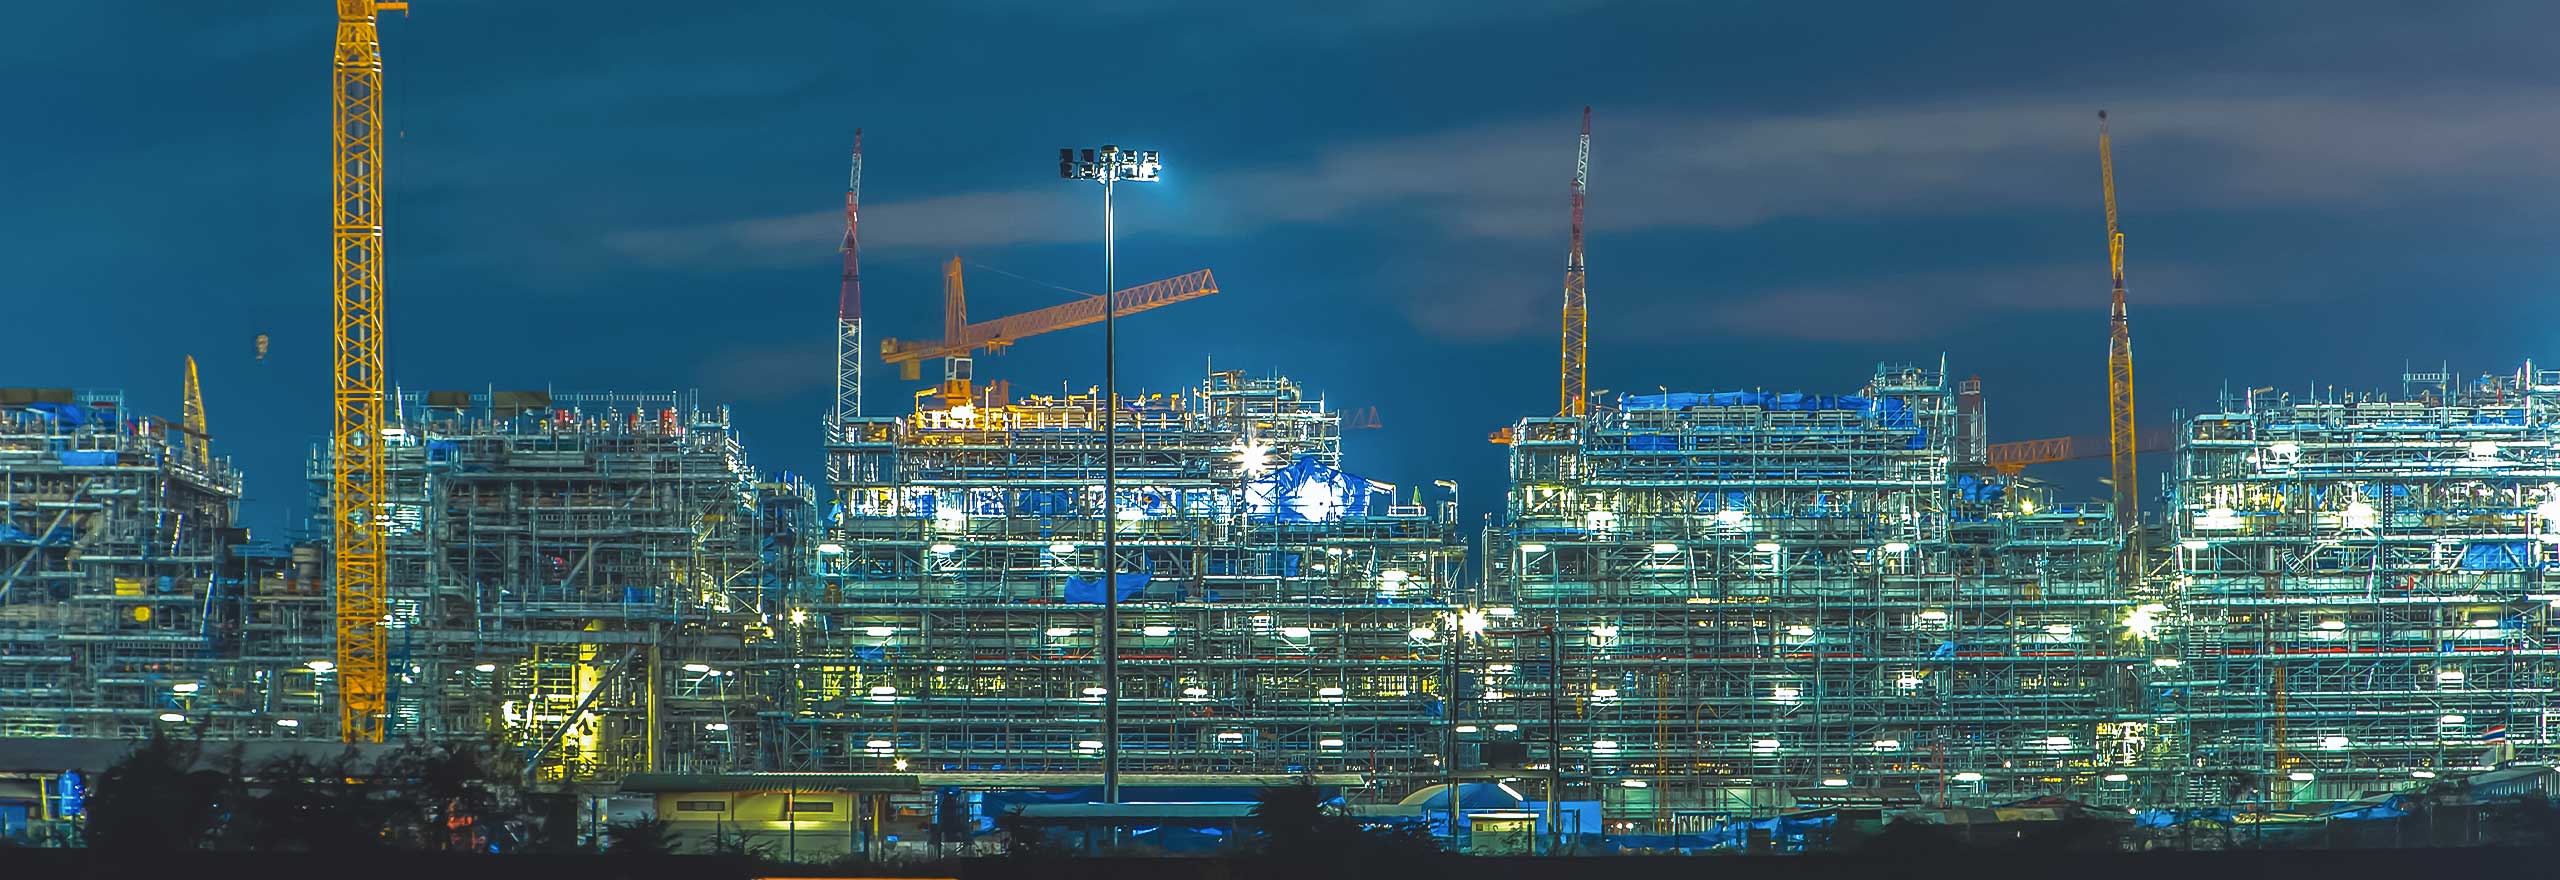 A wide shot of a large construction site and multiple cranes at night